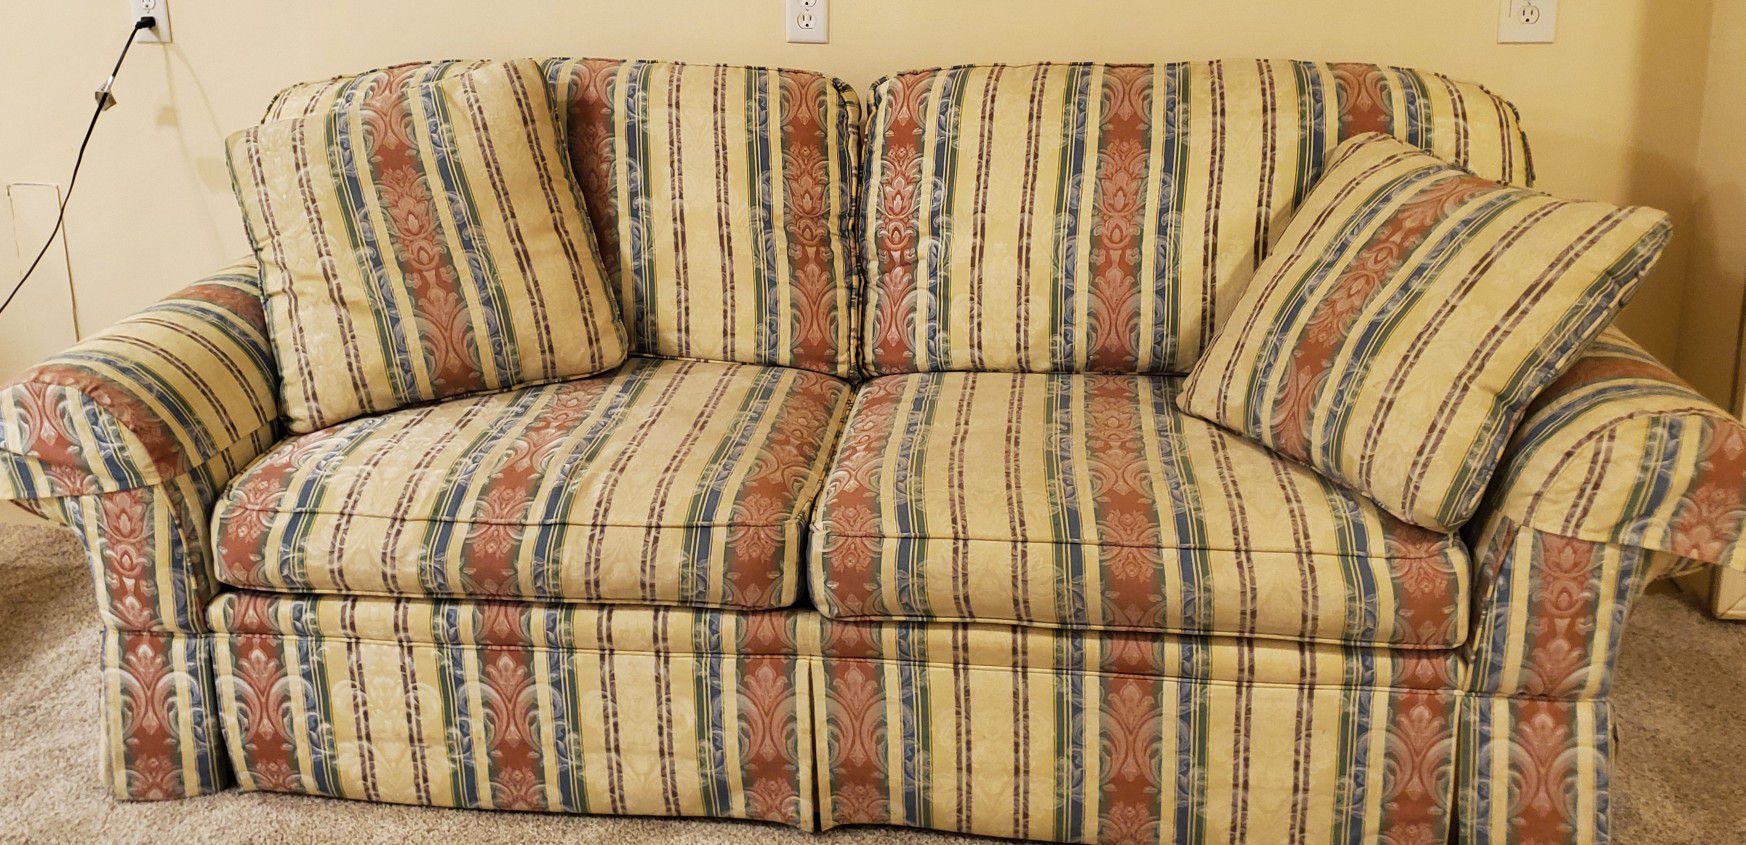 Clayton Marcus "like new" Large Striped Sofa With pleated bottom Real Wood Legs, 2 Matching Pillows